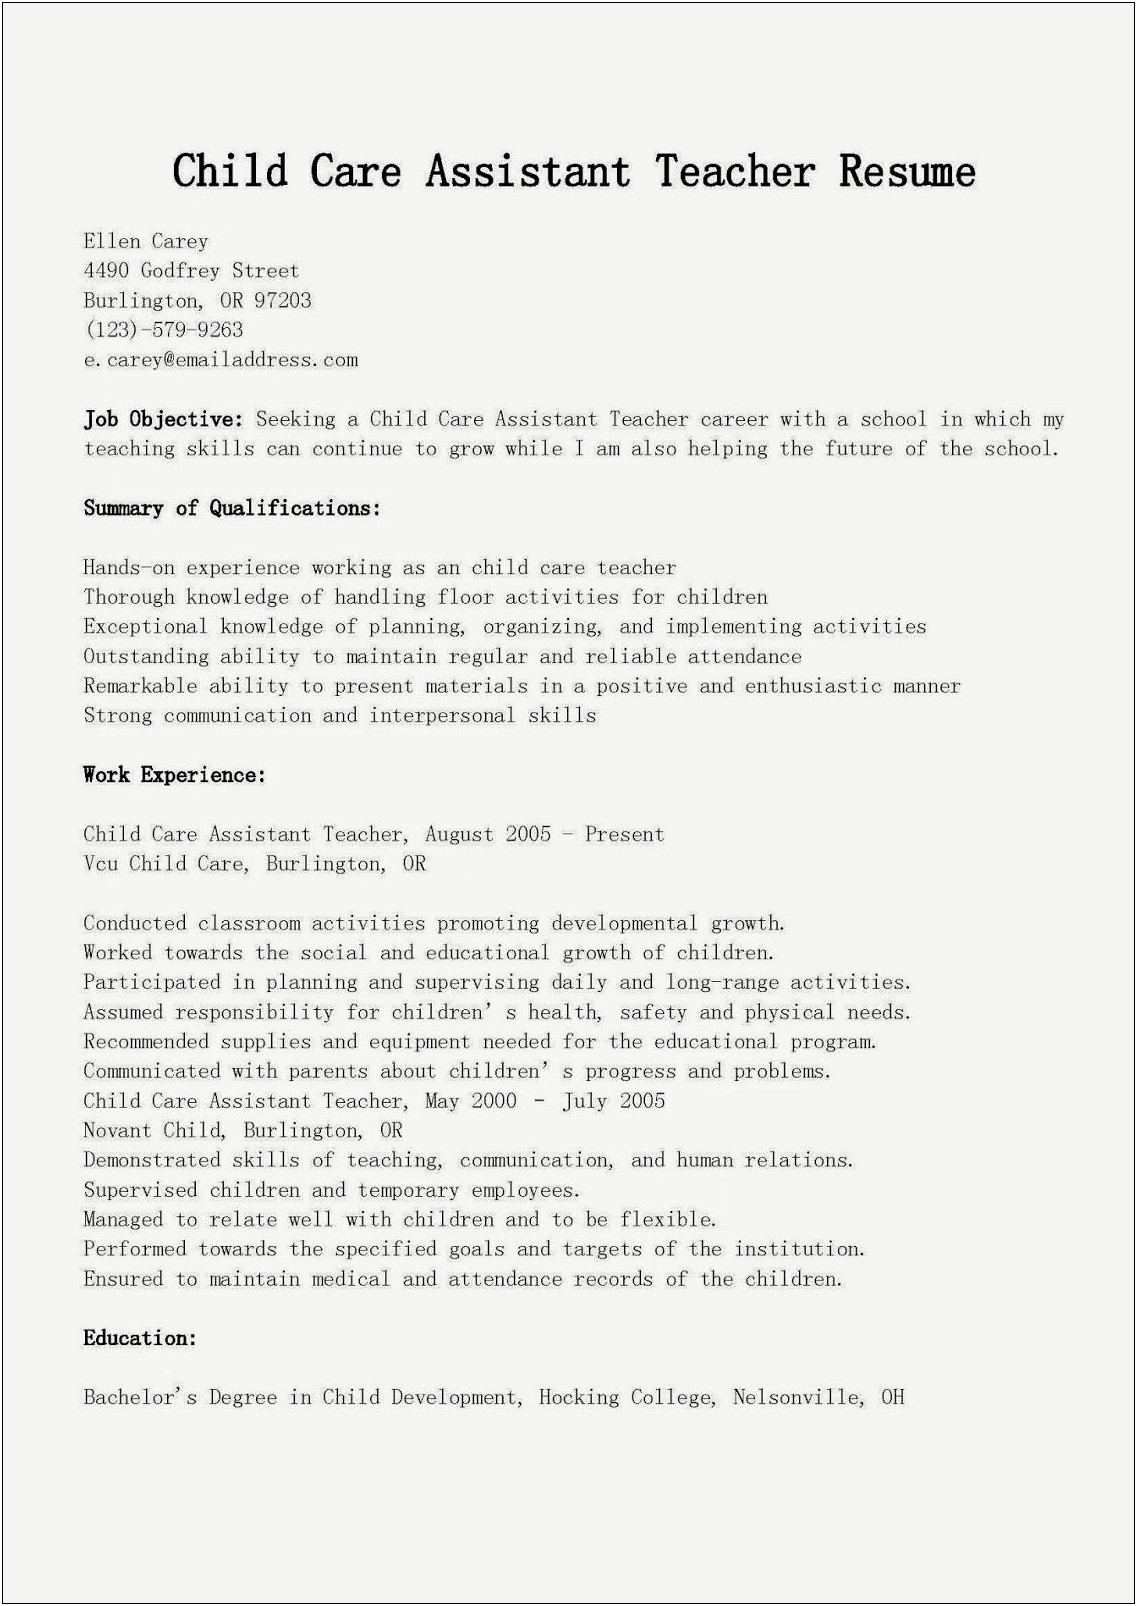 Child Care Worker Resume Professional Summary